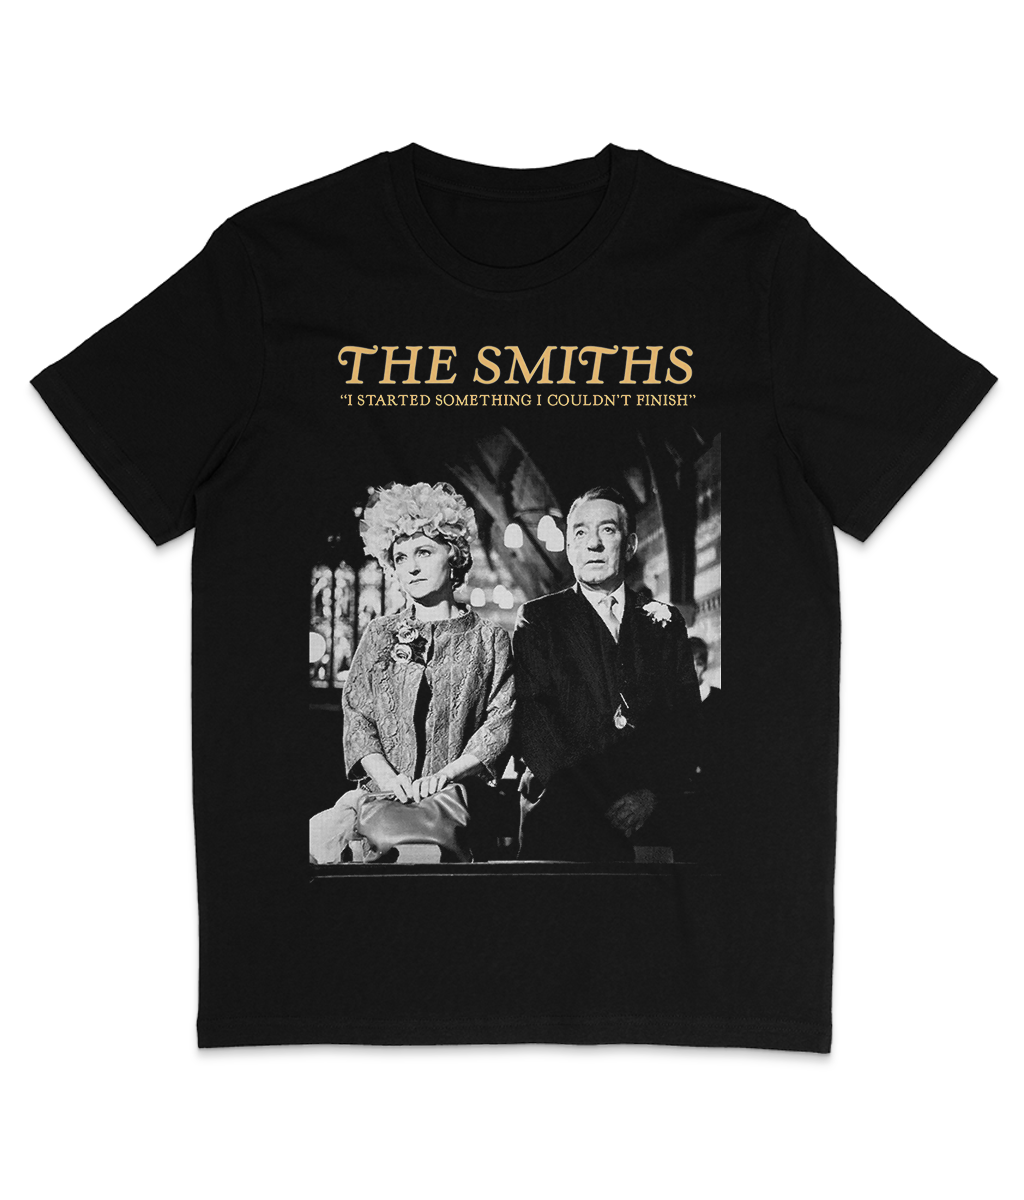 The Smiths - I Started Something I Couldn't Finish - Church - 1987 - Halftone